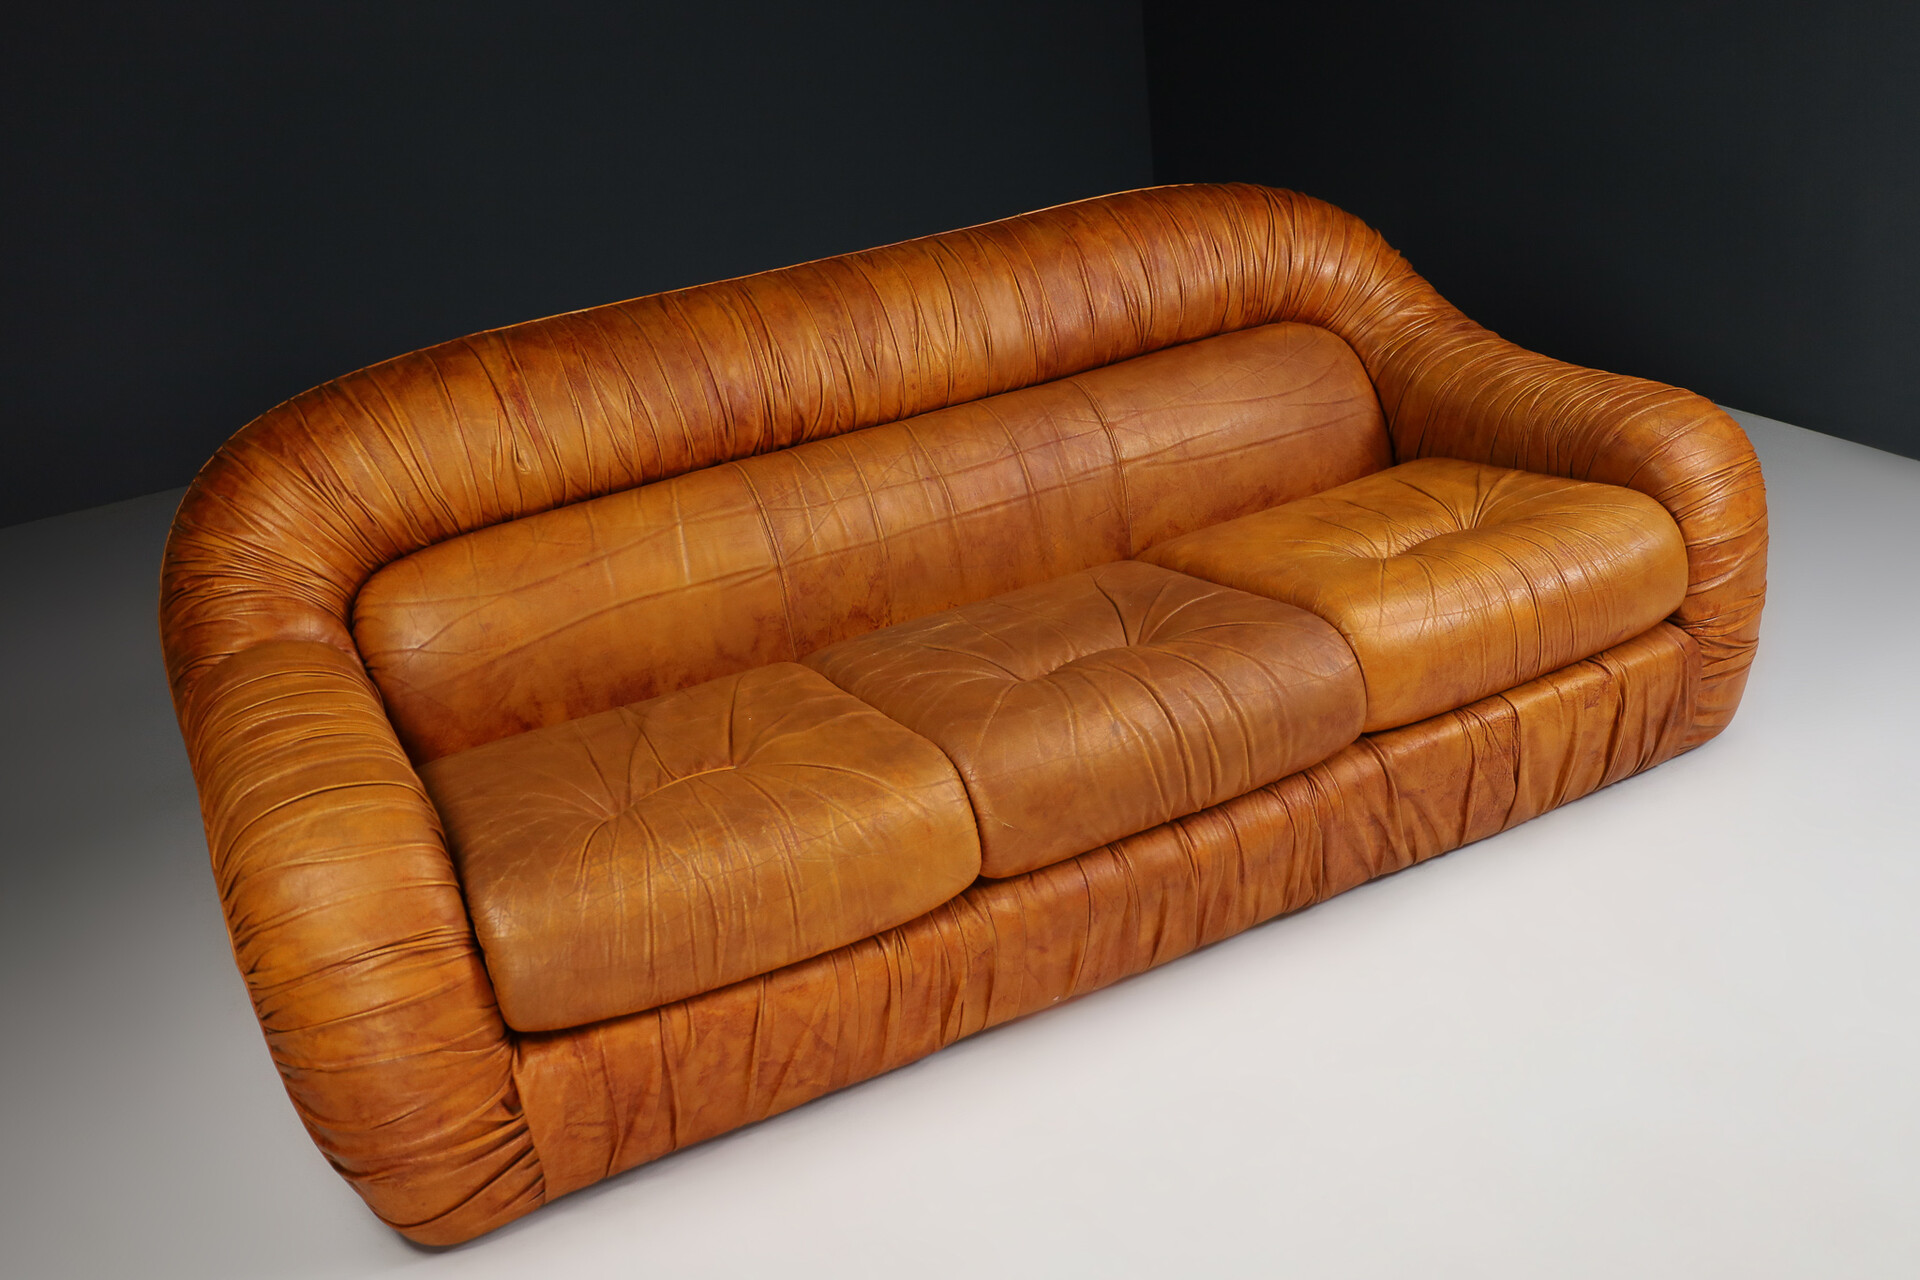 century for modern brown - in - model by Sofas George Davidowski designed Late-20th century Italy 1970s Benches - and Eurosalotto, Mid \'Capriccio\' original Seating leather, Bighinello Lounge sofa